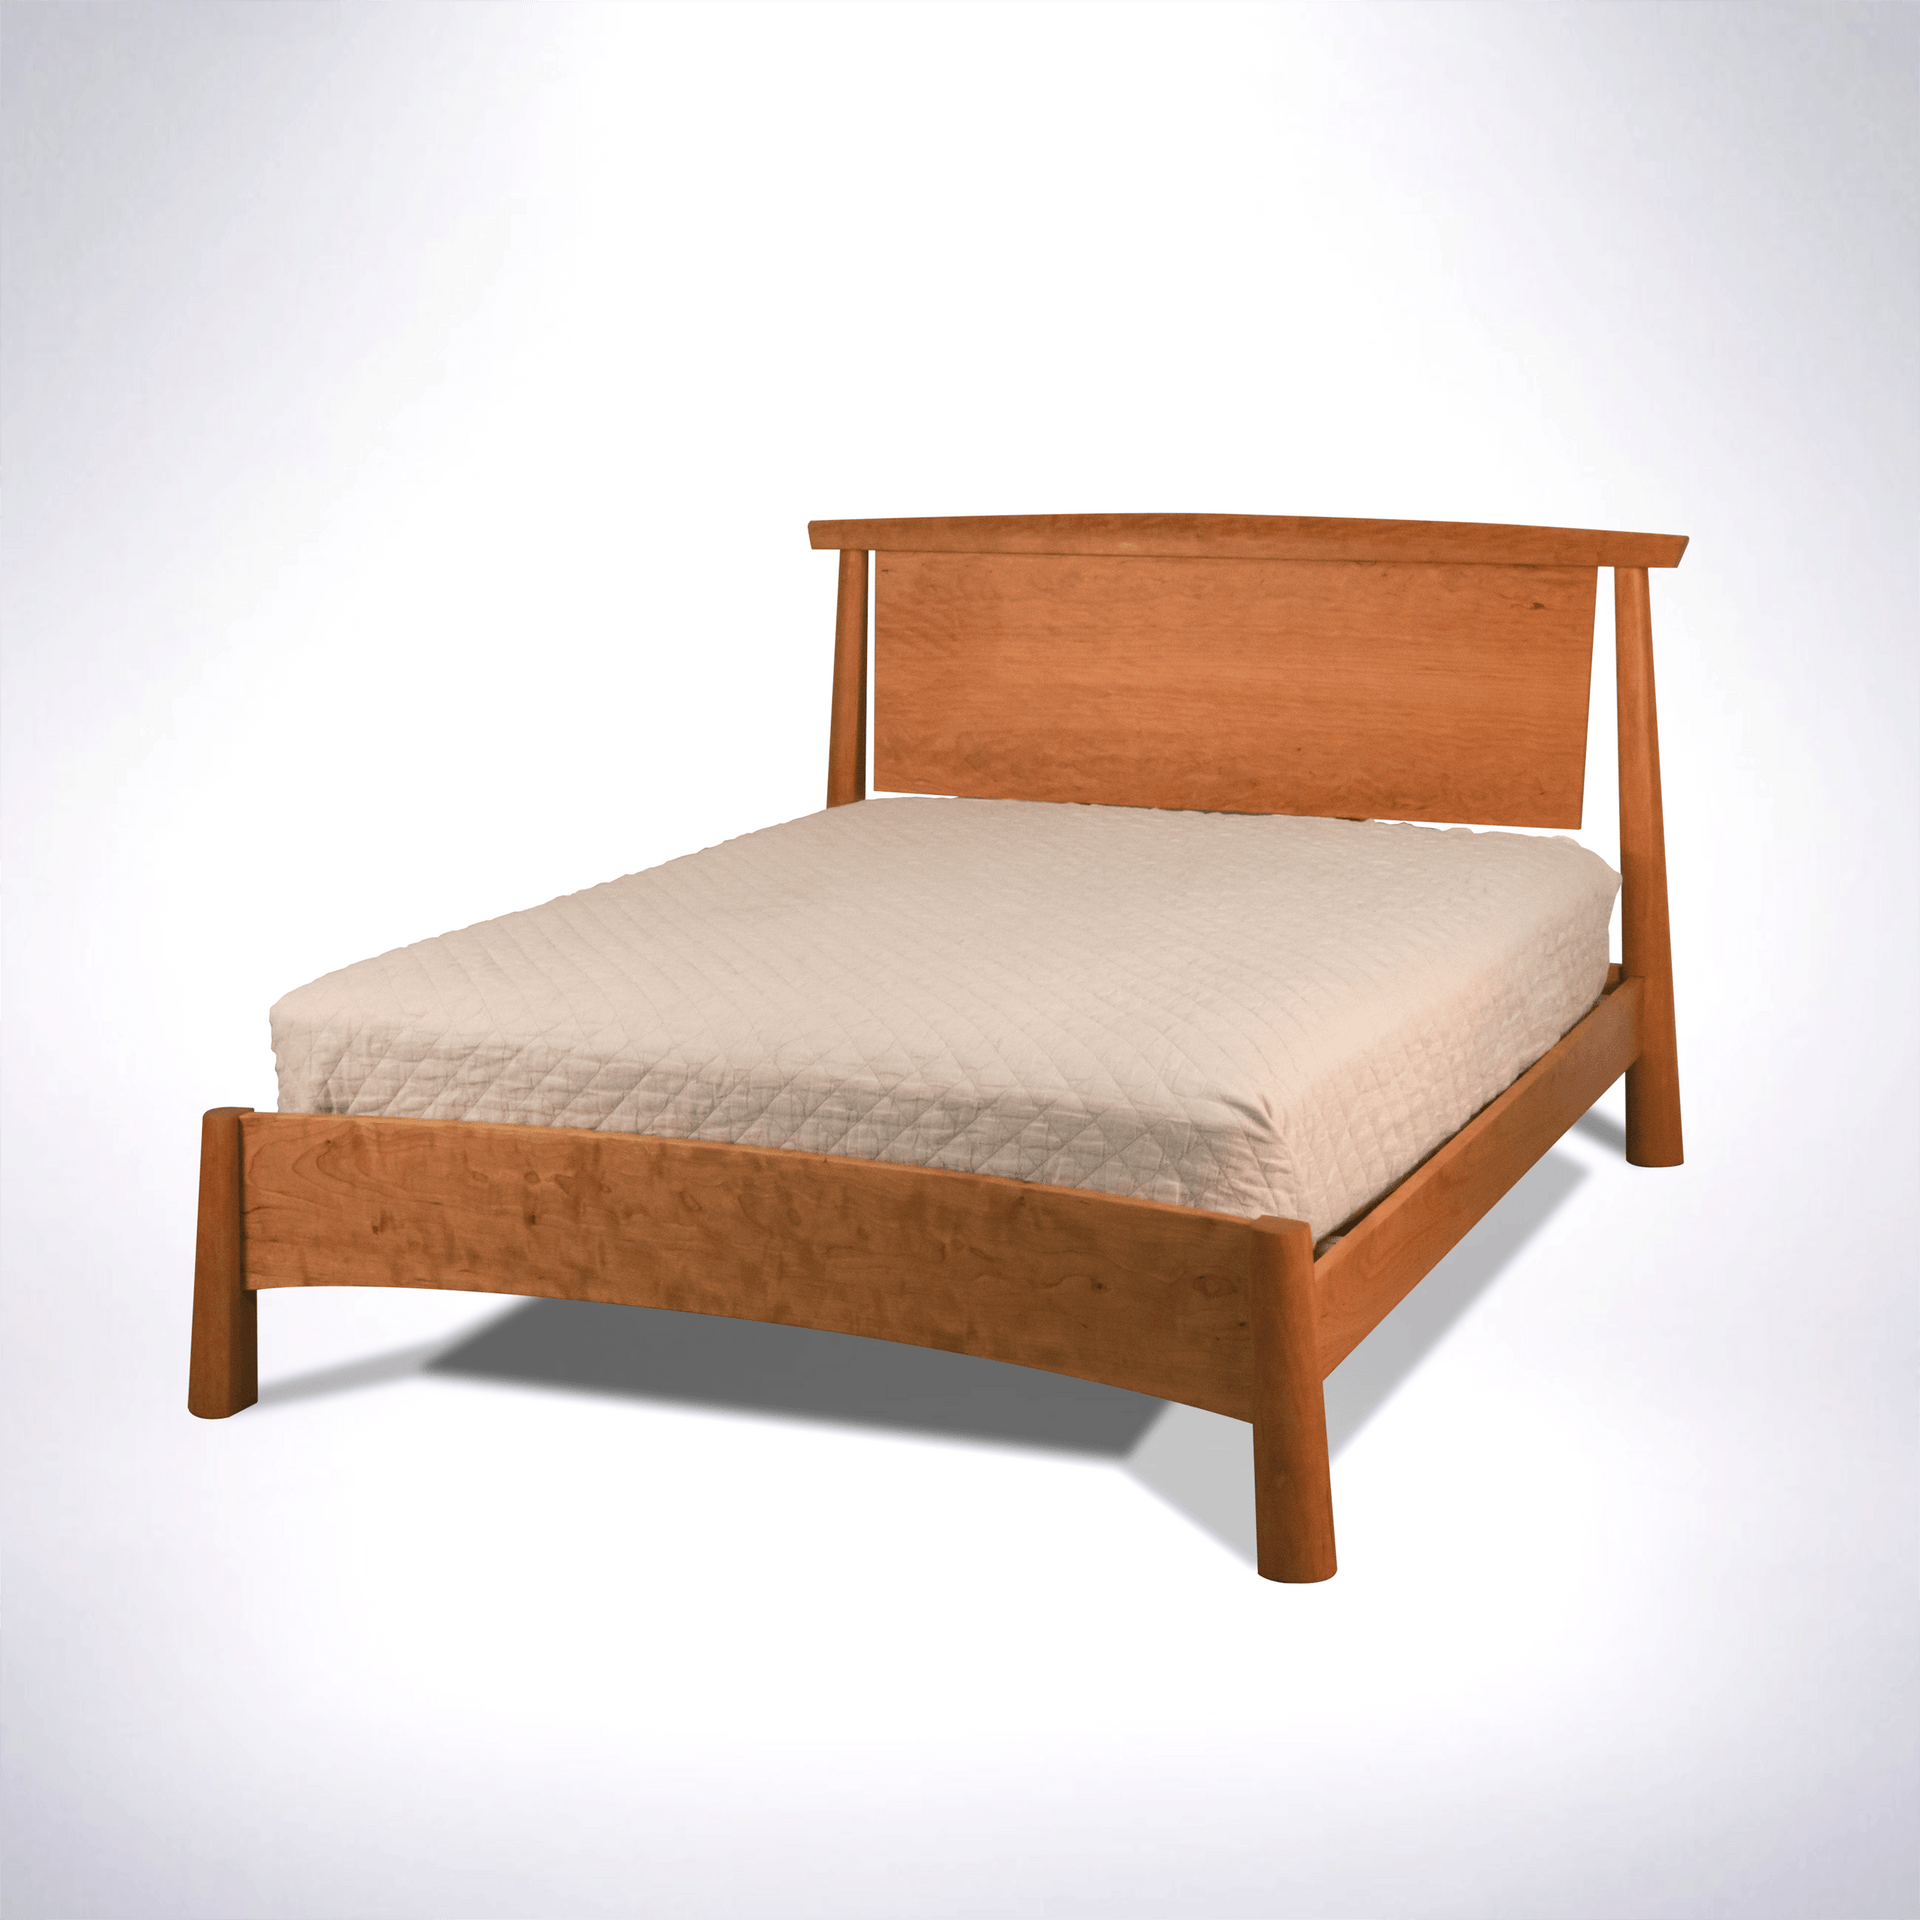 Solid wood platform bed, a modern bed frame, and an organic furniture